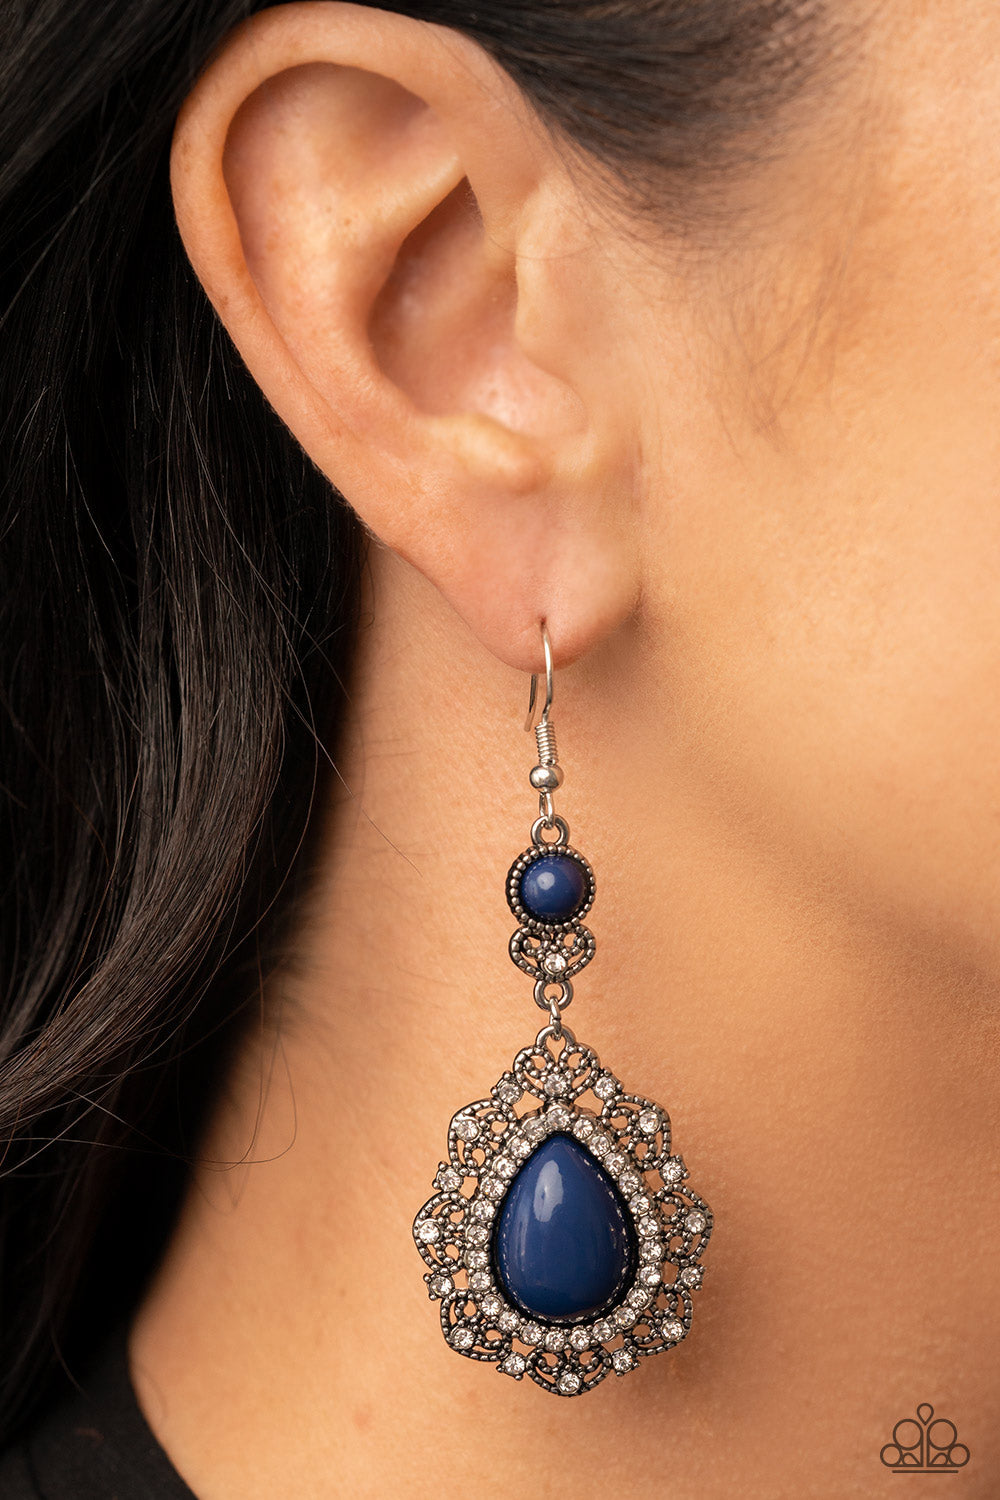 Palace Bribe - Blue and Silver Earrings - Paparazzi Accessories - An oversized Rhodonite teardrop bead is bordered in a ring of glassy white rhinestones atop a silvery backdrop of a white rhinestone dotted heart motif. The charming frame swings from a matching beaded and rhinestone encrusted fitting, resulting in a romantic dash of color. Earring attaches to a standard fishhook fitting. Sold as one pair of earrings.